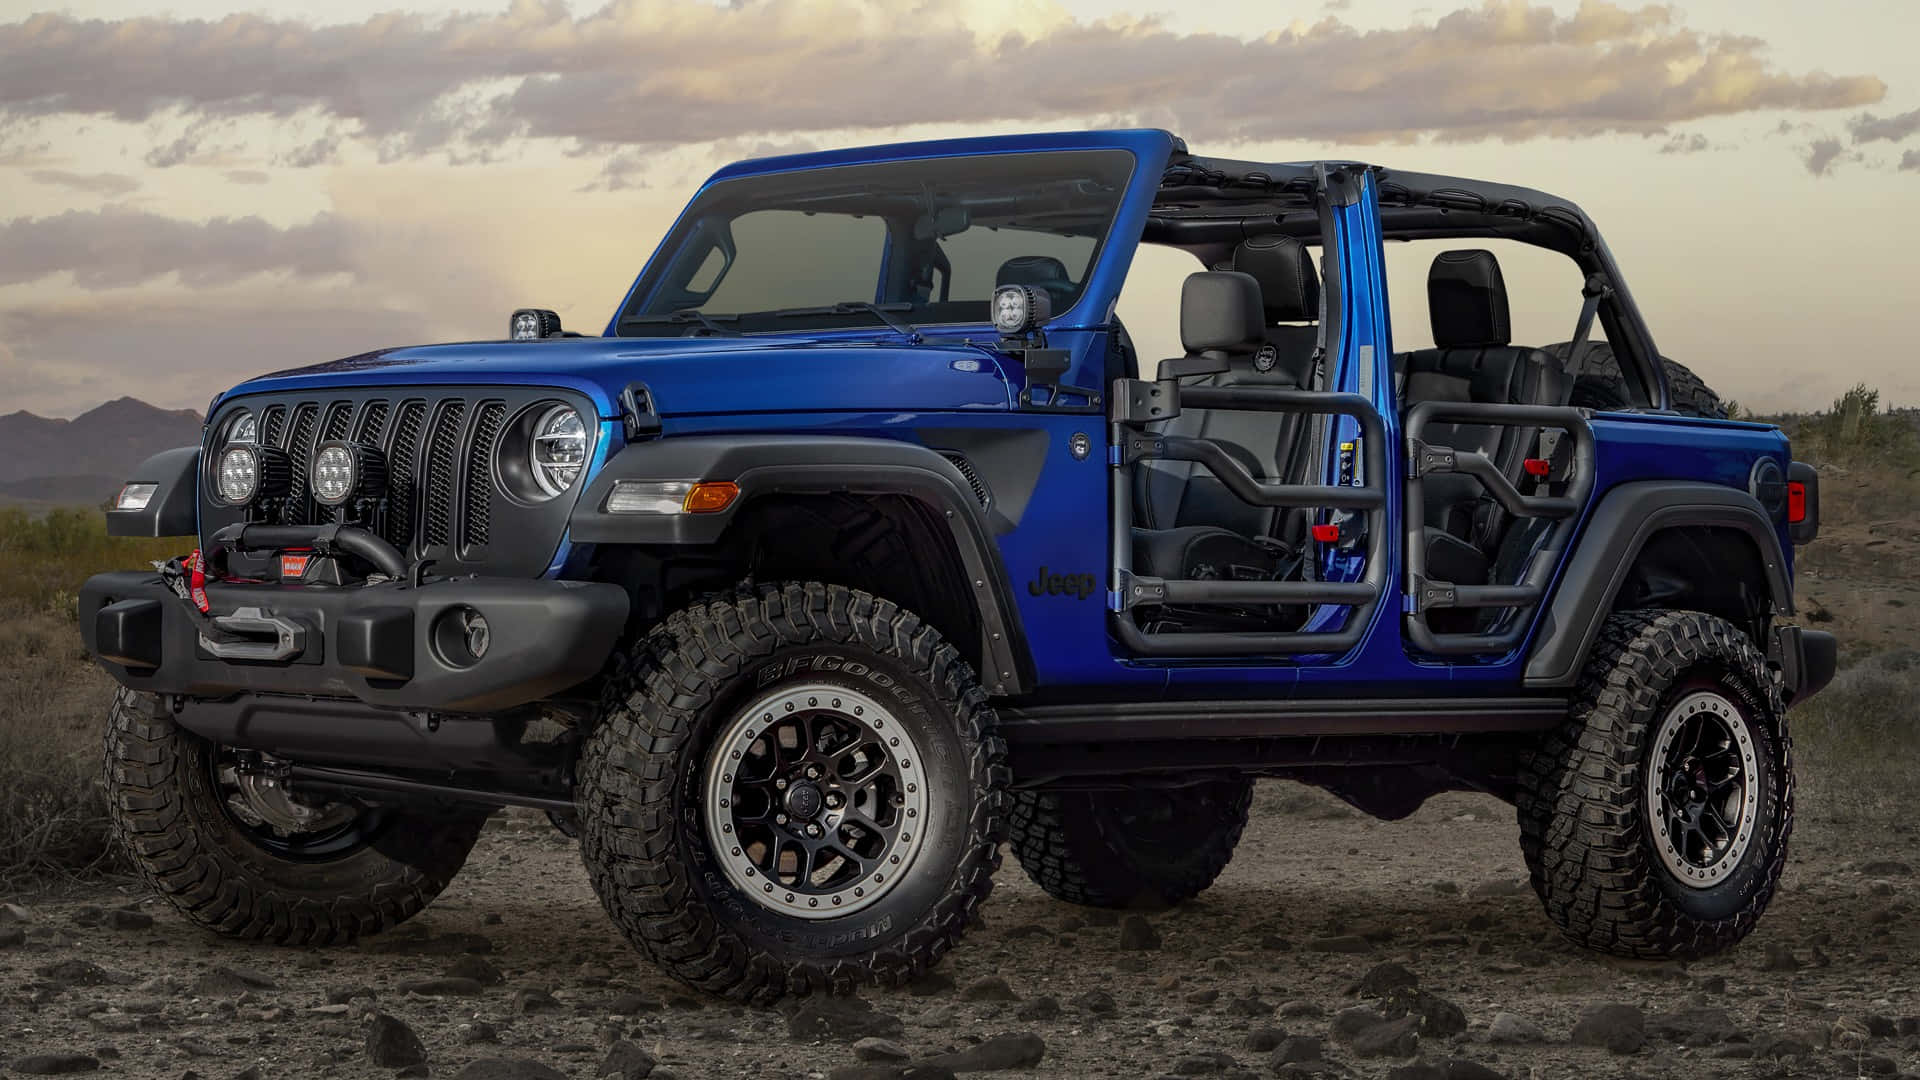 The Blue Jeep Wrangler Is Parked In The Desert